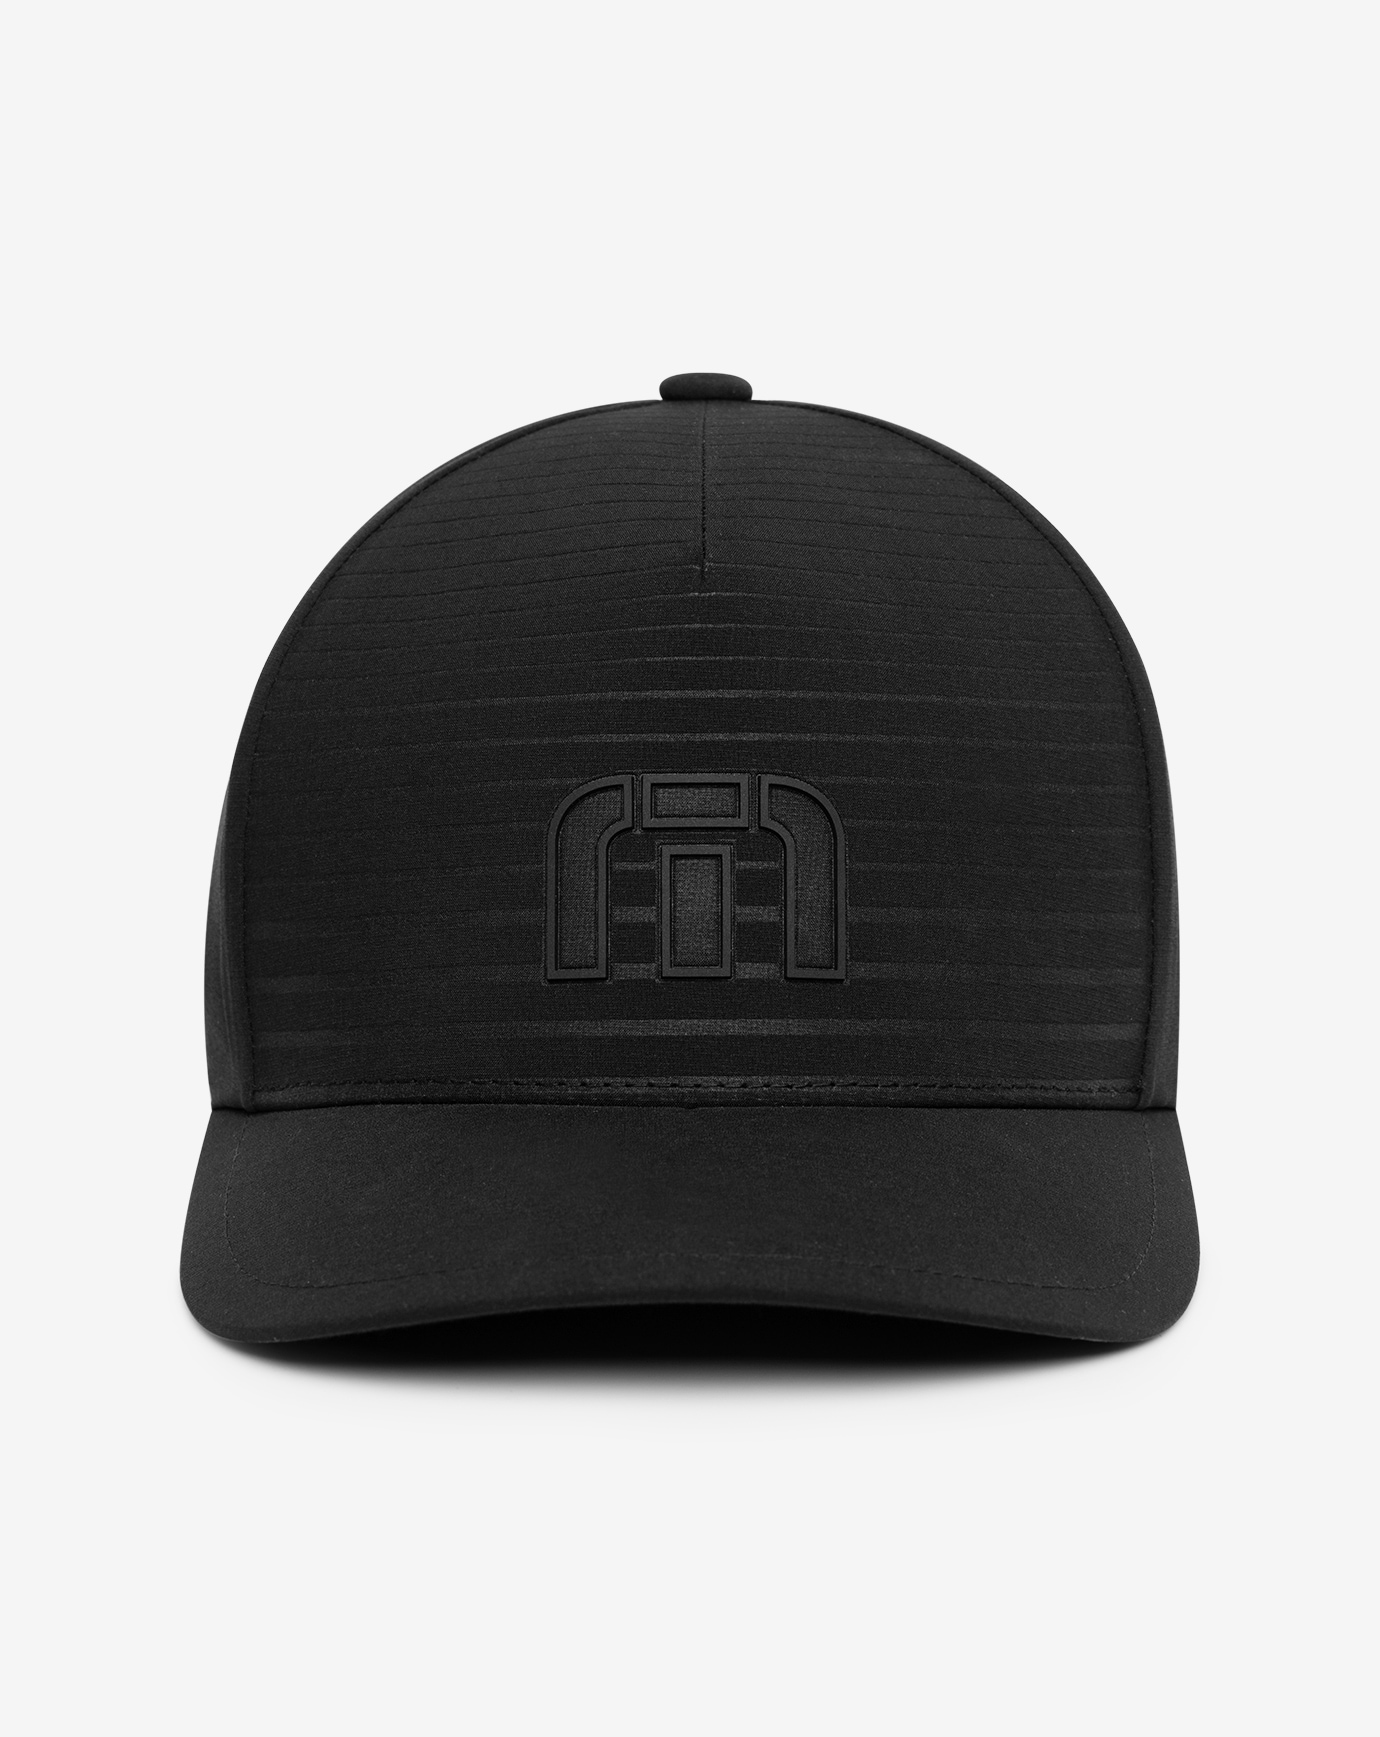 Related Product - TAHONA HEATER TECH FITTED HAT